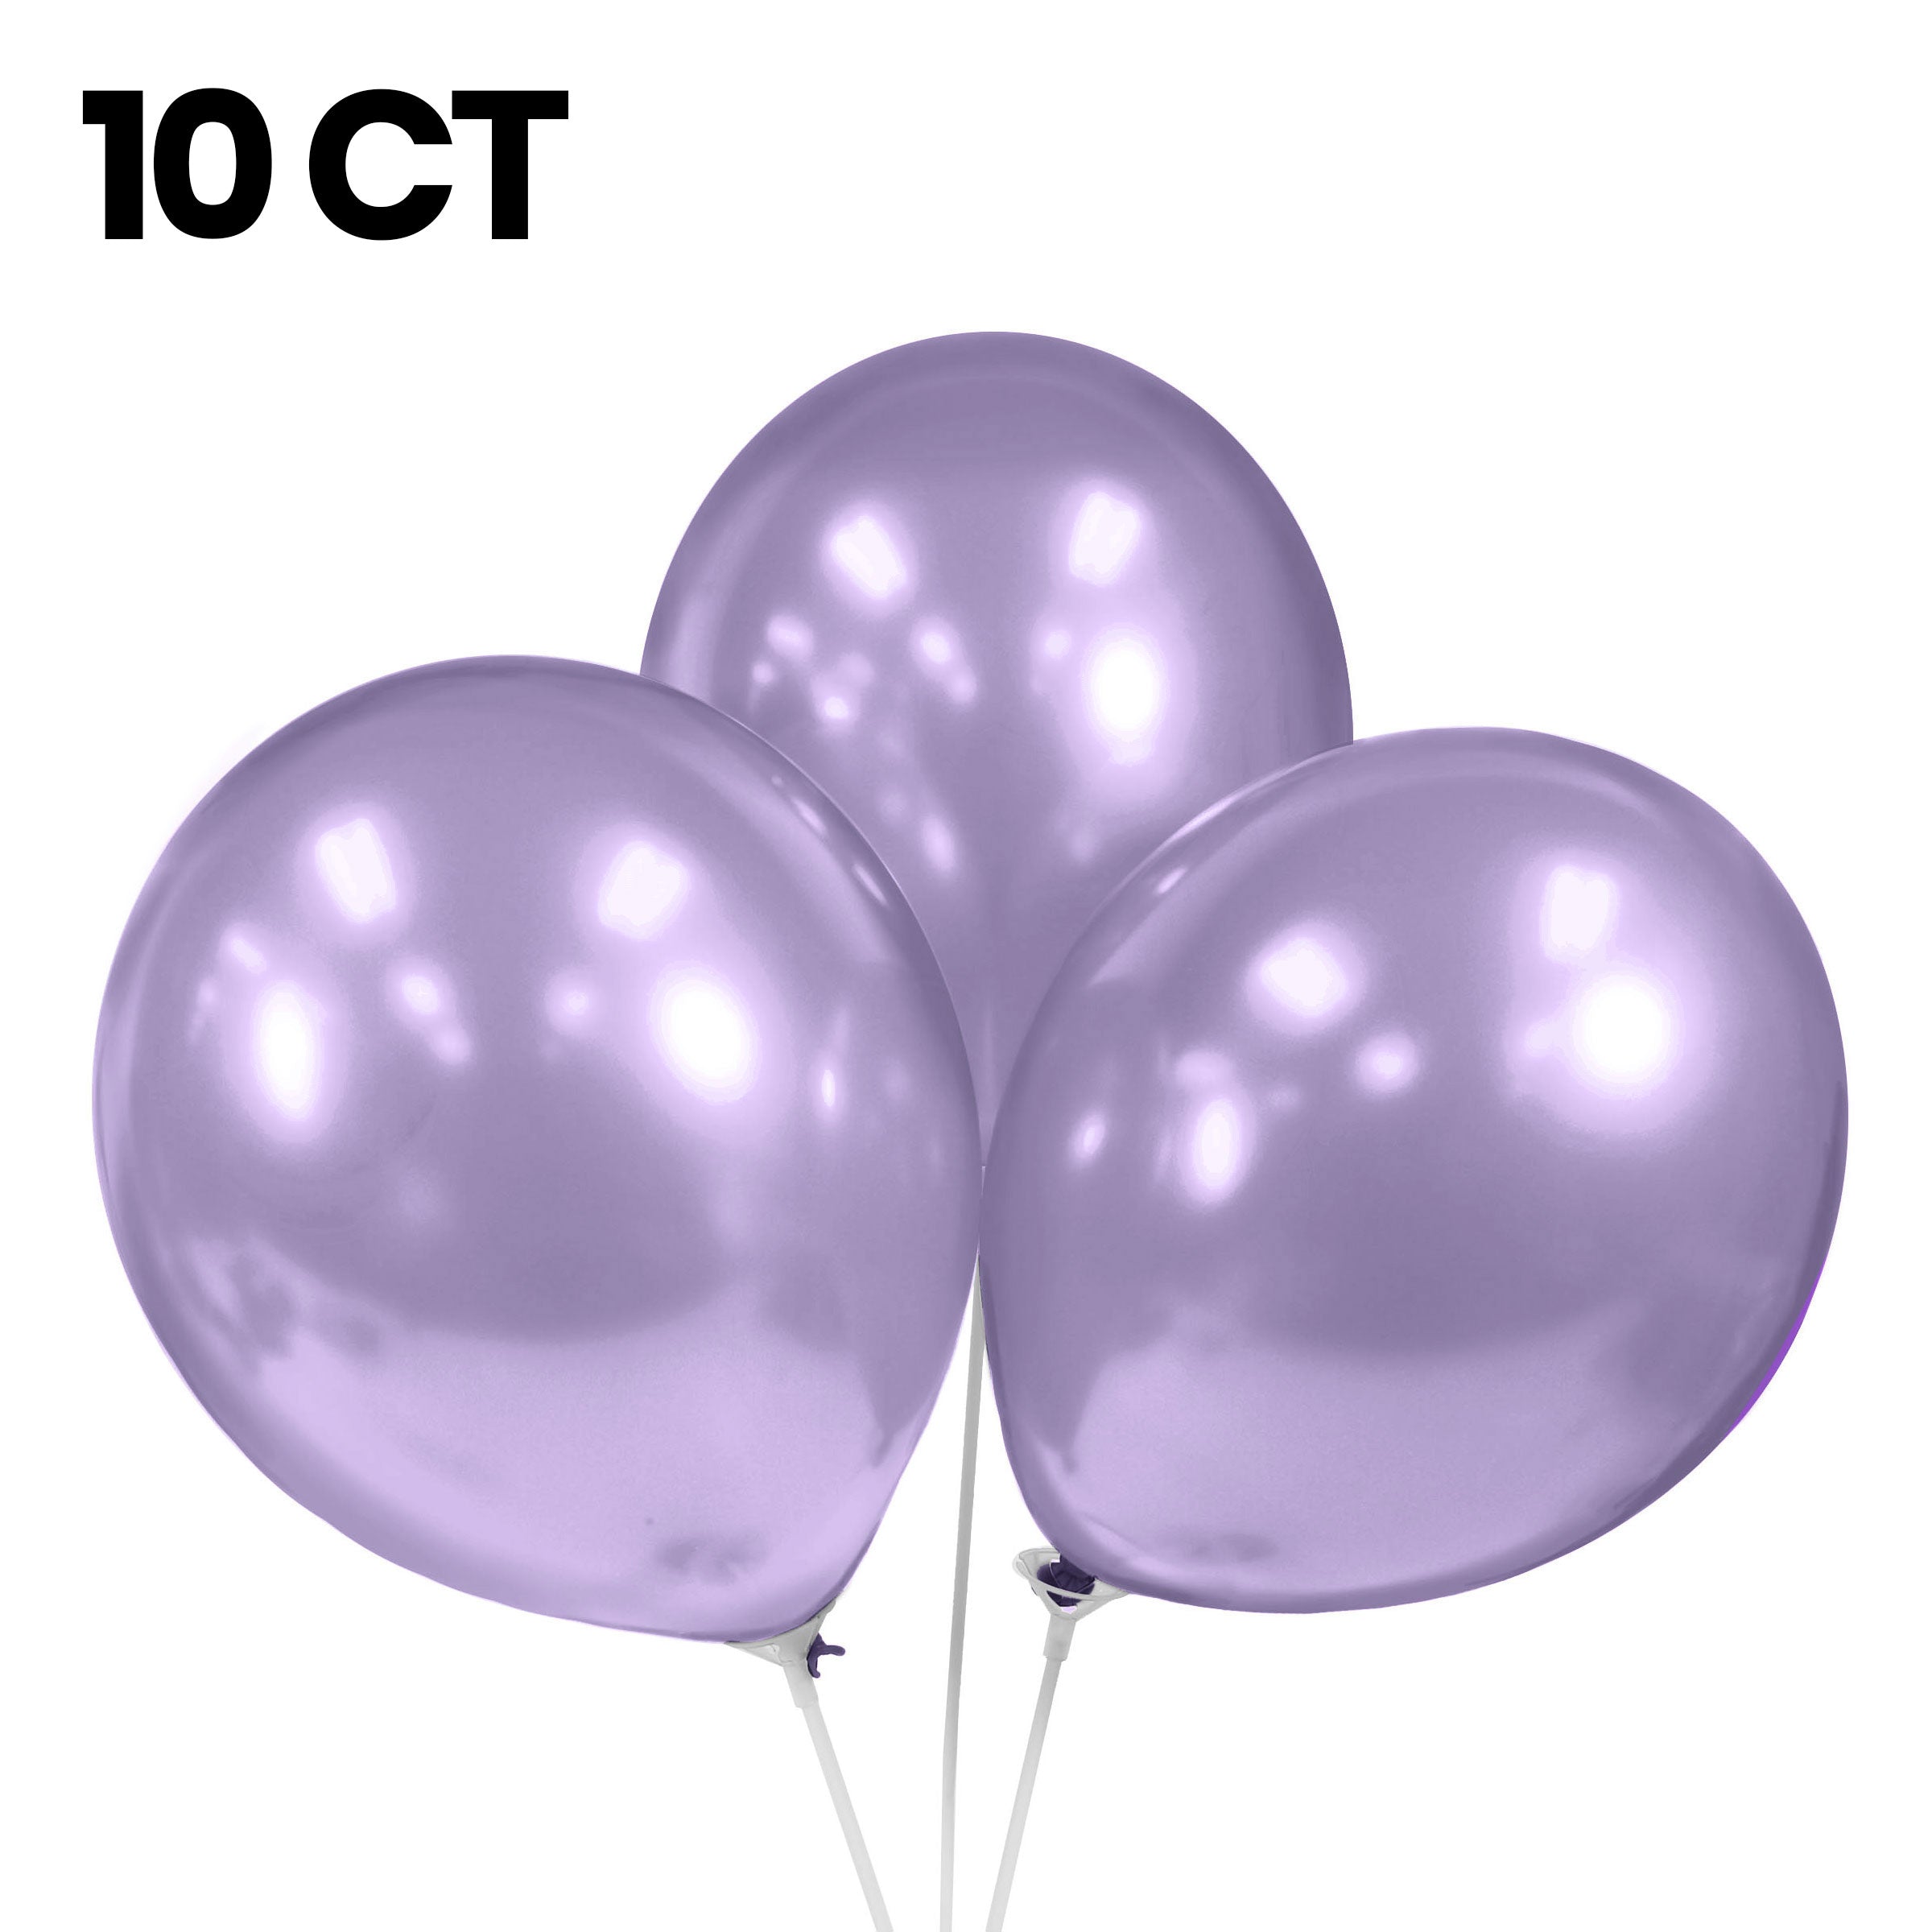 Party Balloons, Pearlized Balloons, 12" Metallic Balloons, Pastel Balloons, Lavender Balloons - Gift Expressions